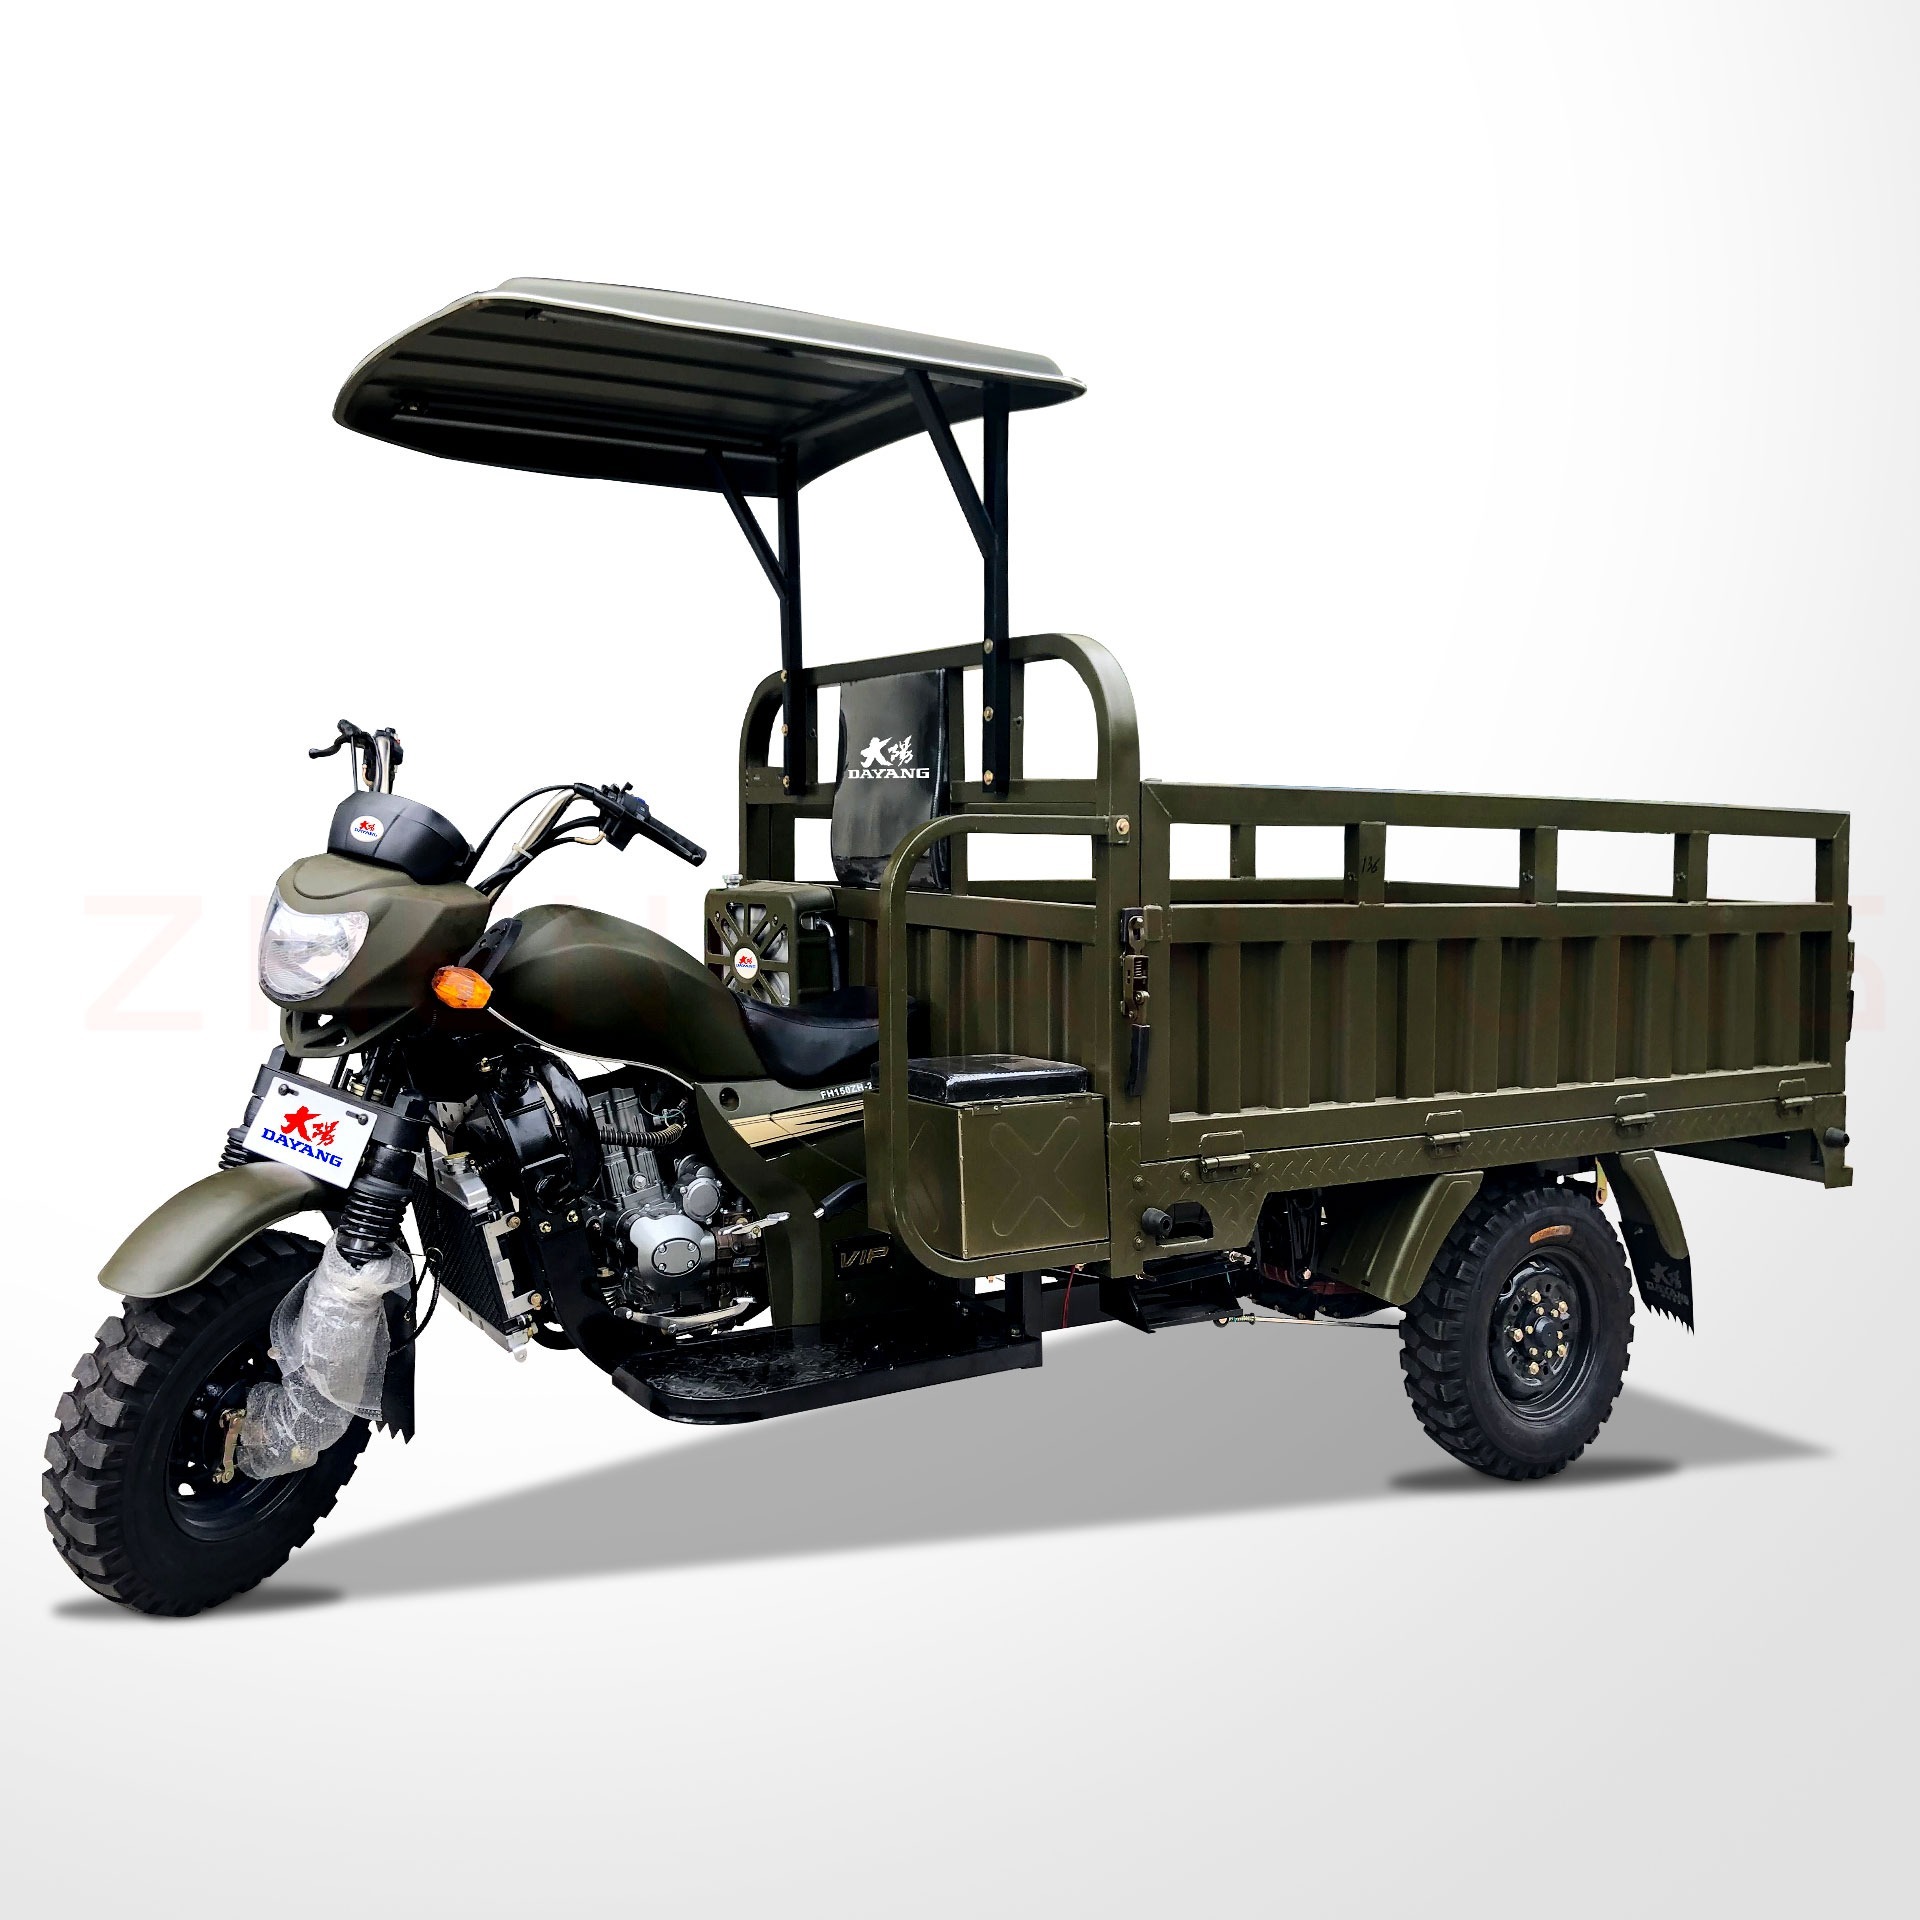 DY-H6 Hot selling Africa cargo tricycle models with powerful engine of 250cc